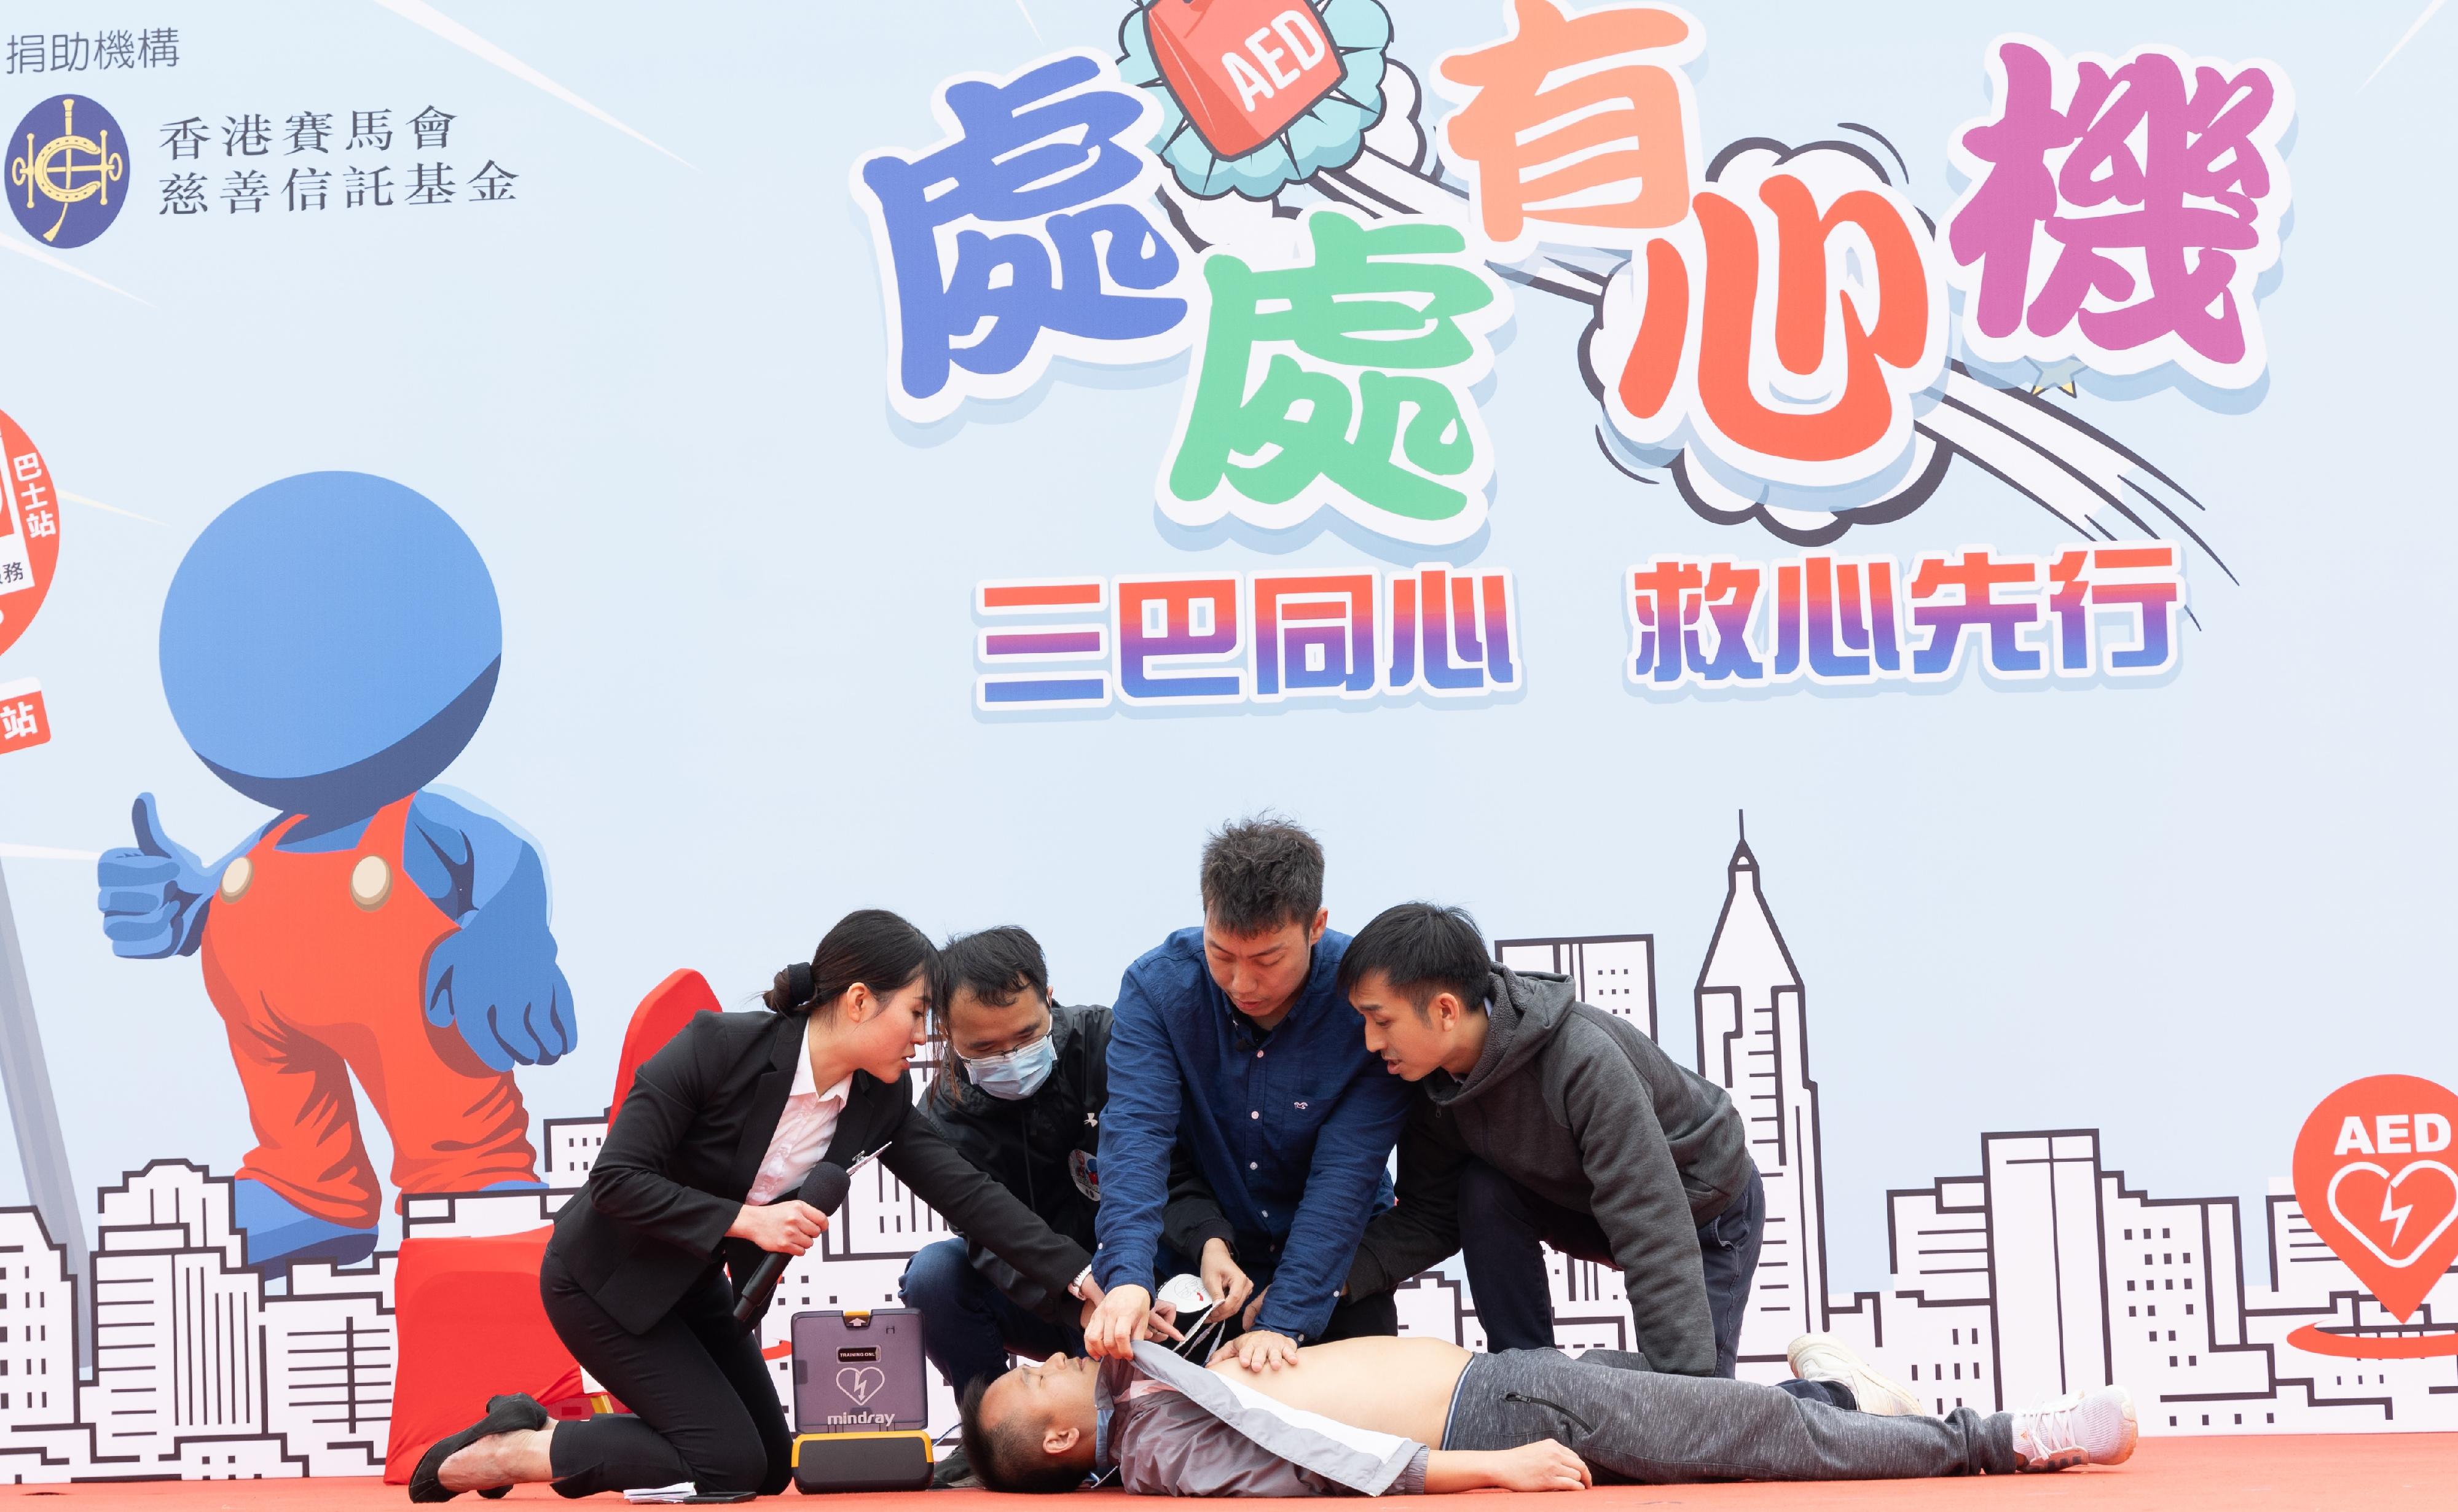 The Fire Services Department today (February 24) organised the AED Everywhere - Bus Companies United to Save Hearts event at the Fire and Ambulance Services Academy in Tseung Kwan O, appealing to all sectors of the community to install more automated external defibrillators (AED). Photo shows participants rescuing a simulated patient after finding an AED nearby in an interactive drama programme.